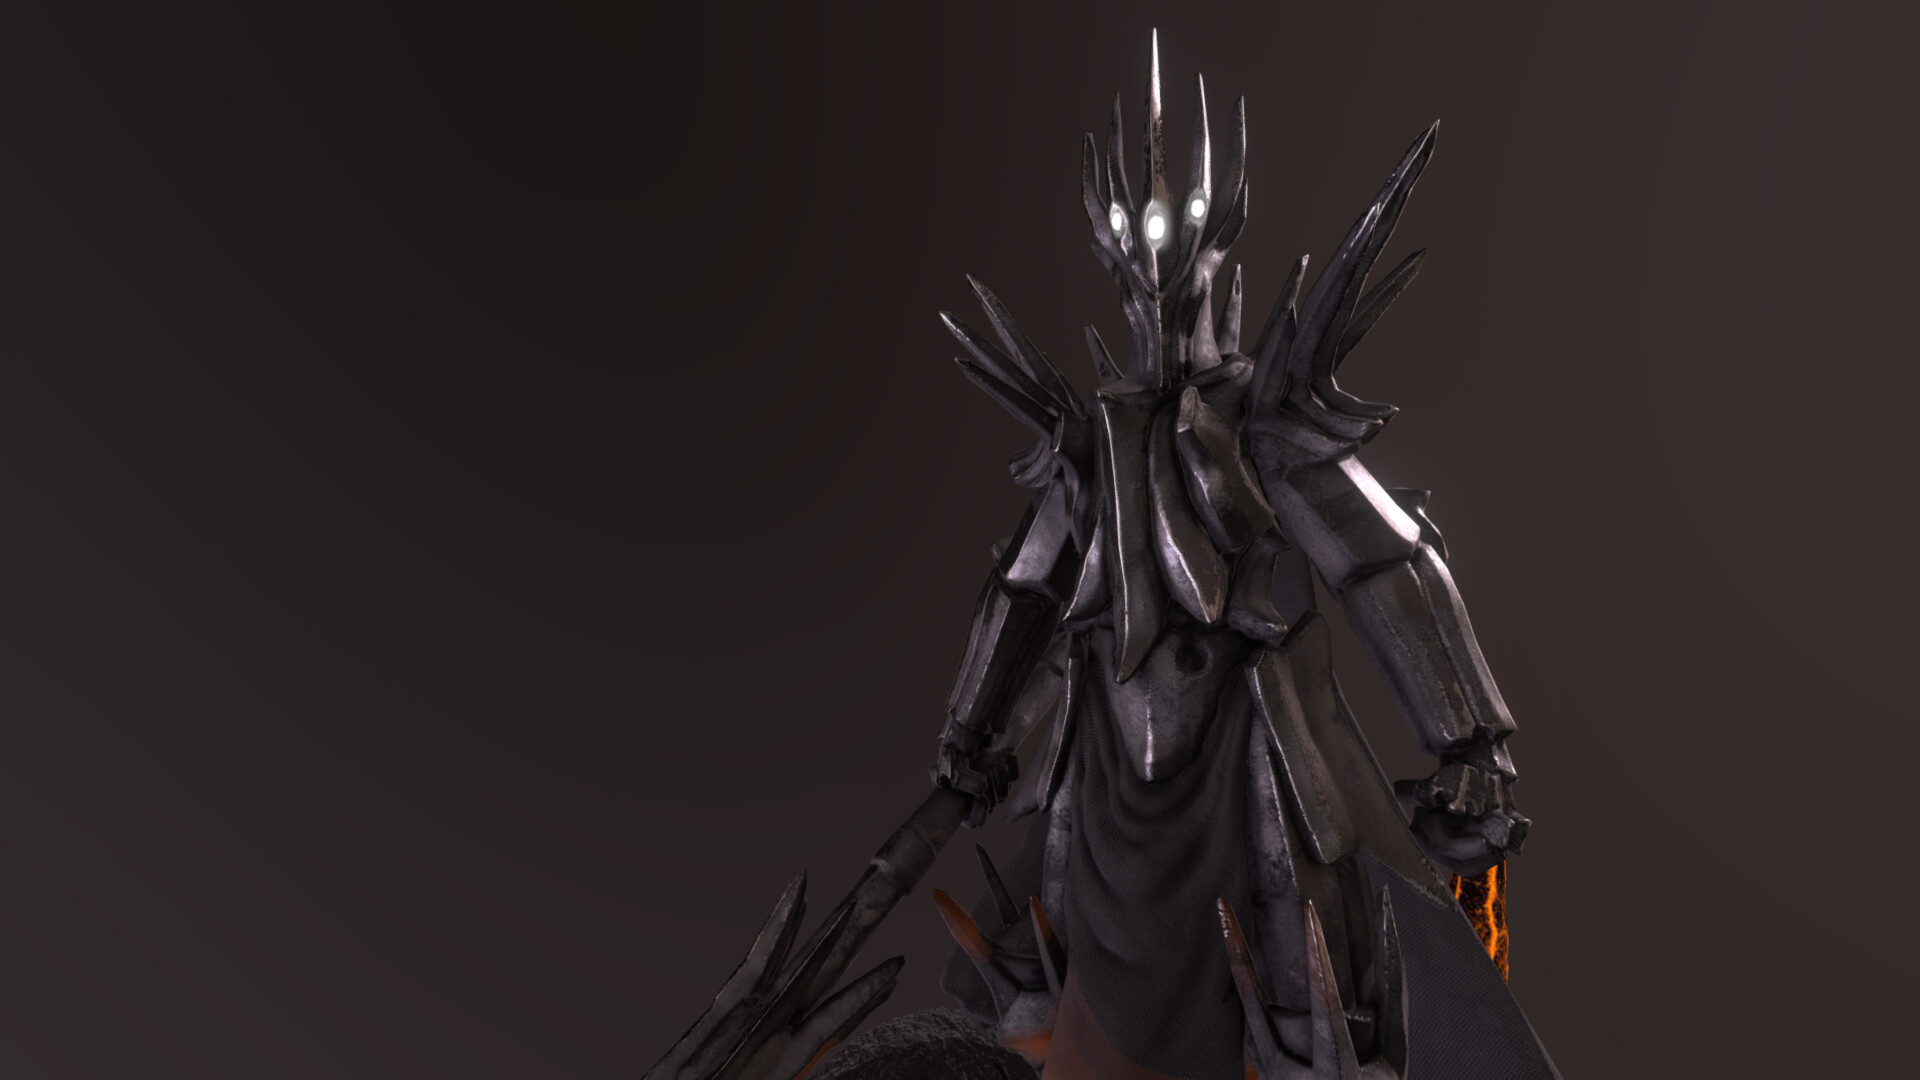 Morgoth the first Dark Lord by AegonVII on DeviantArt